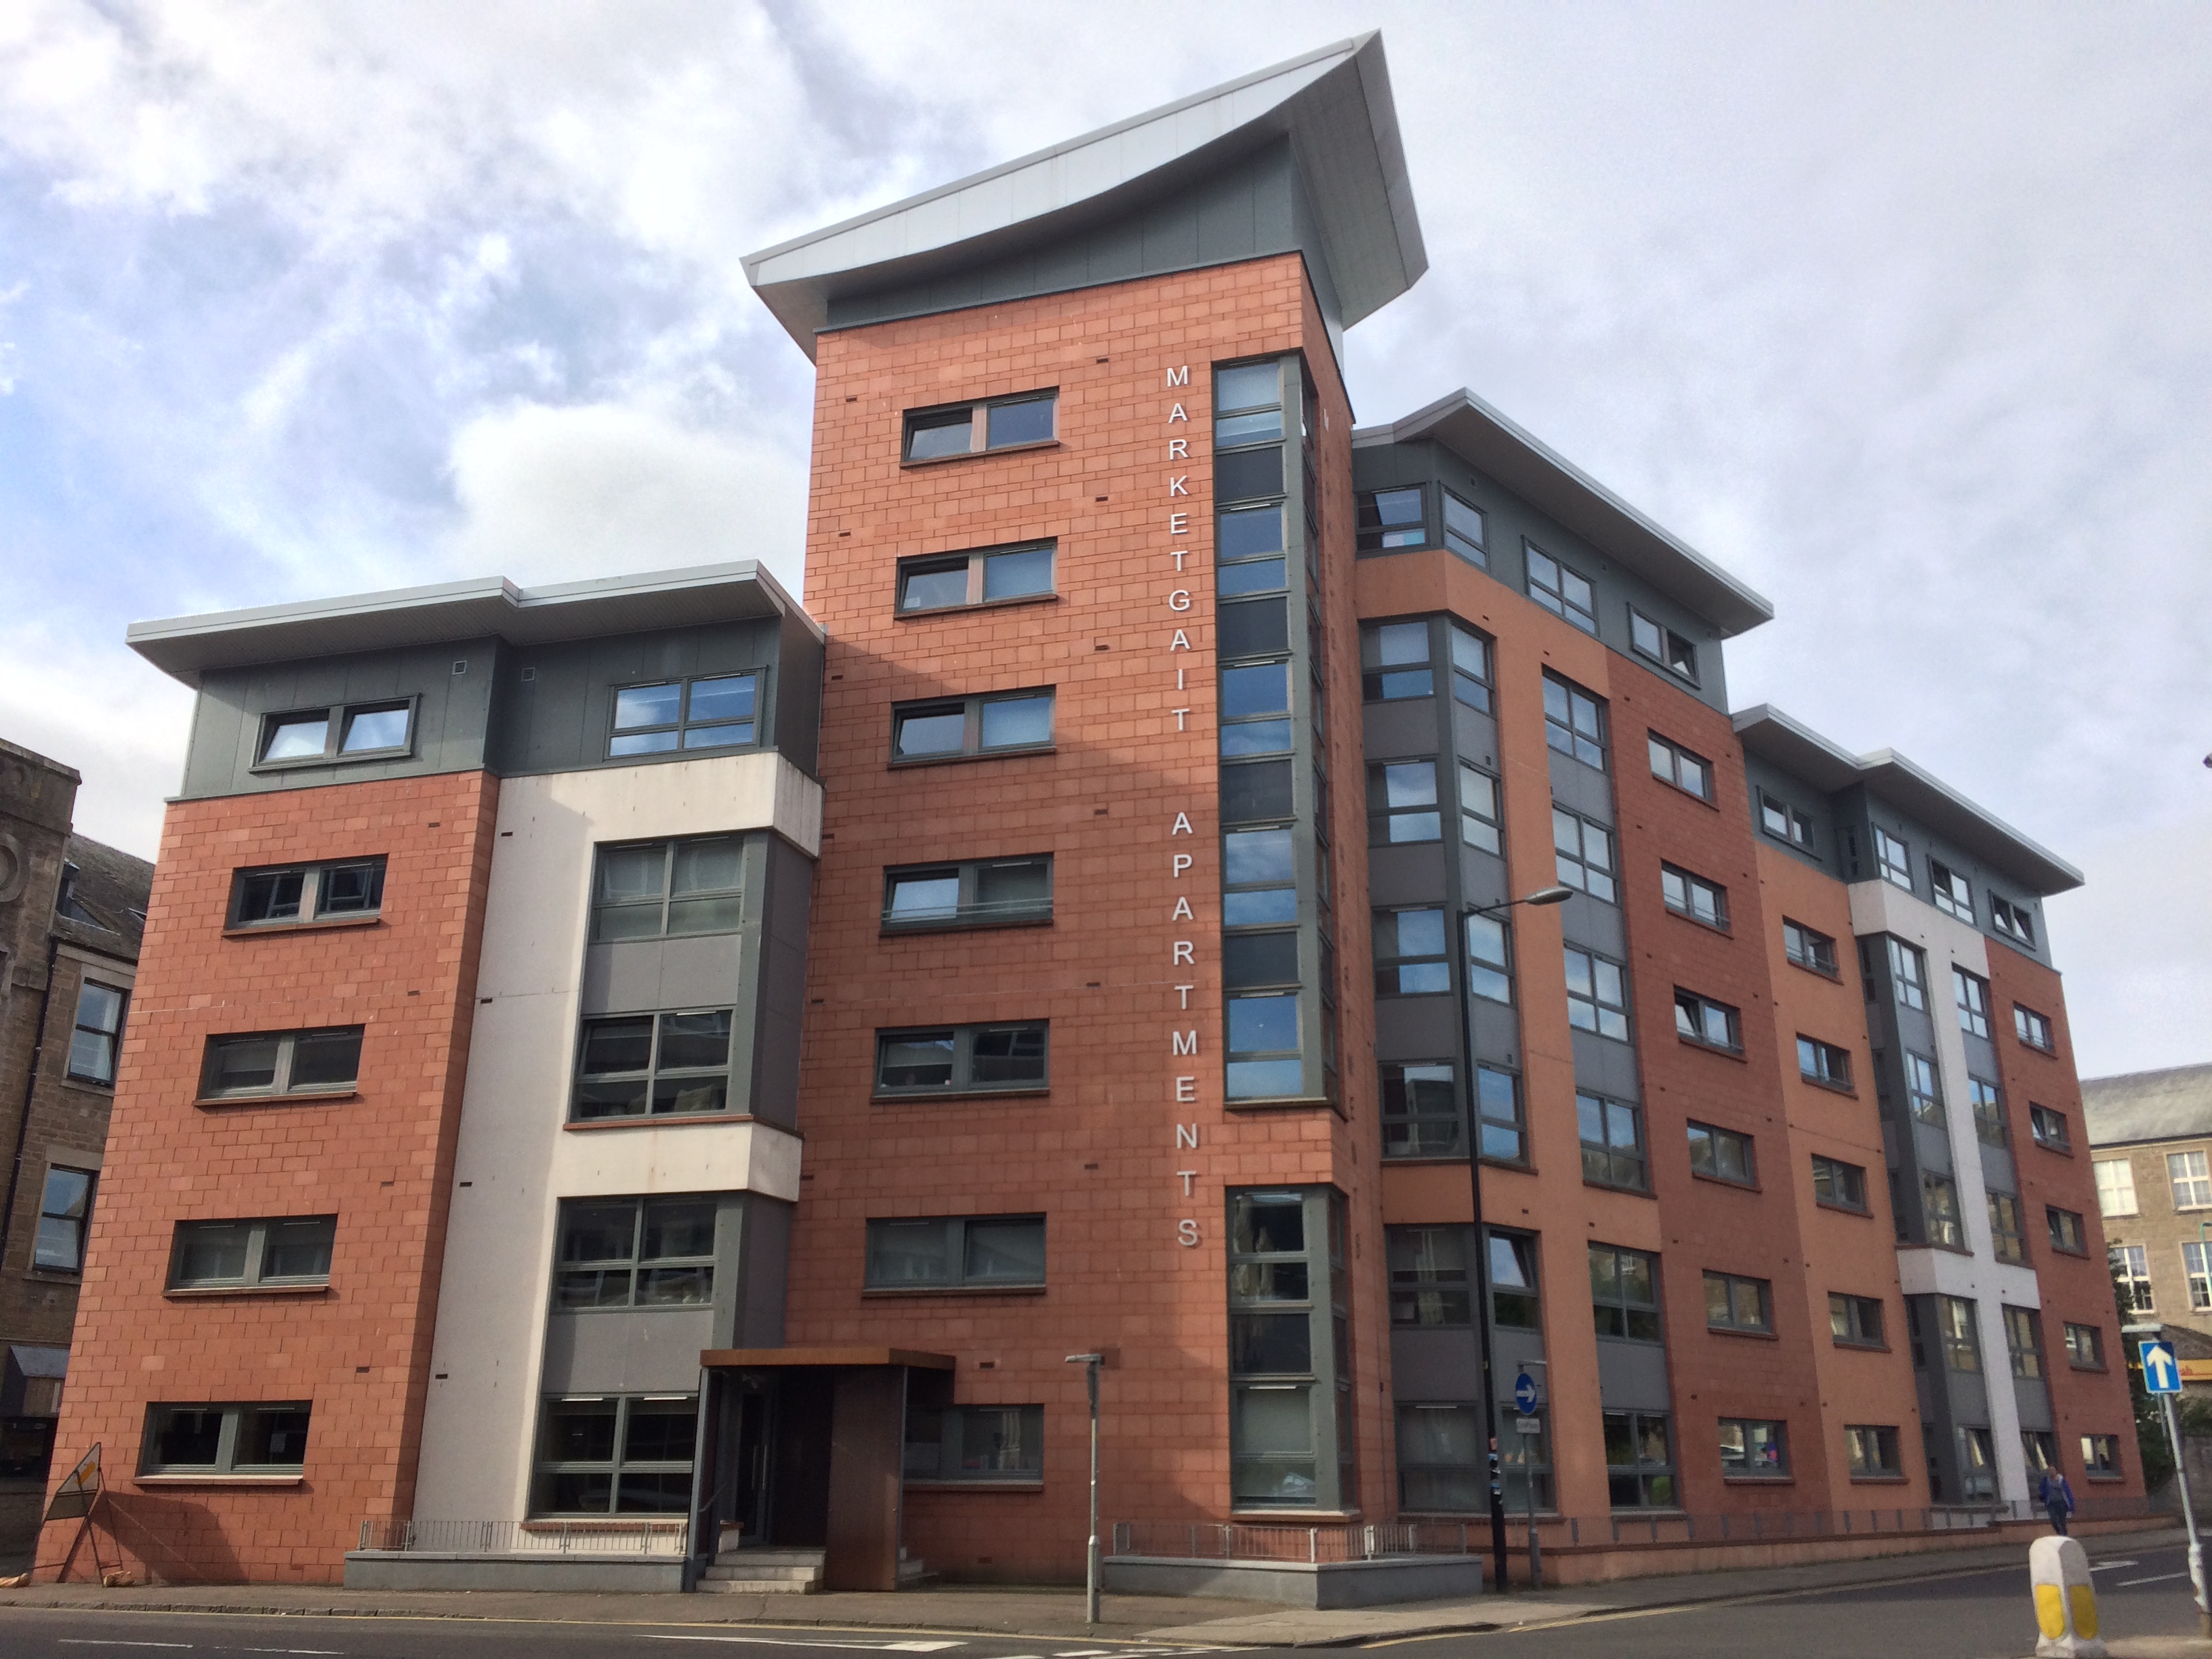 Investment sale of a prime direct let student accommodation asset